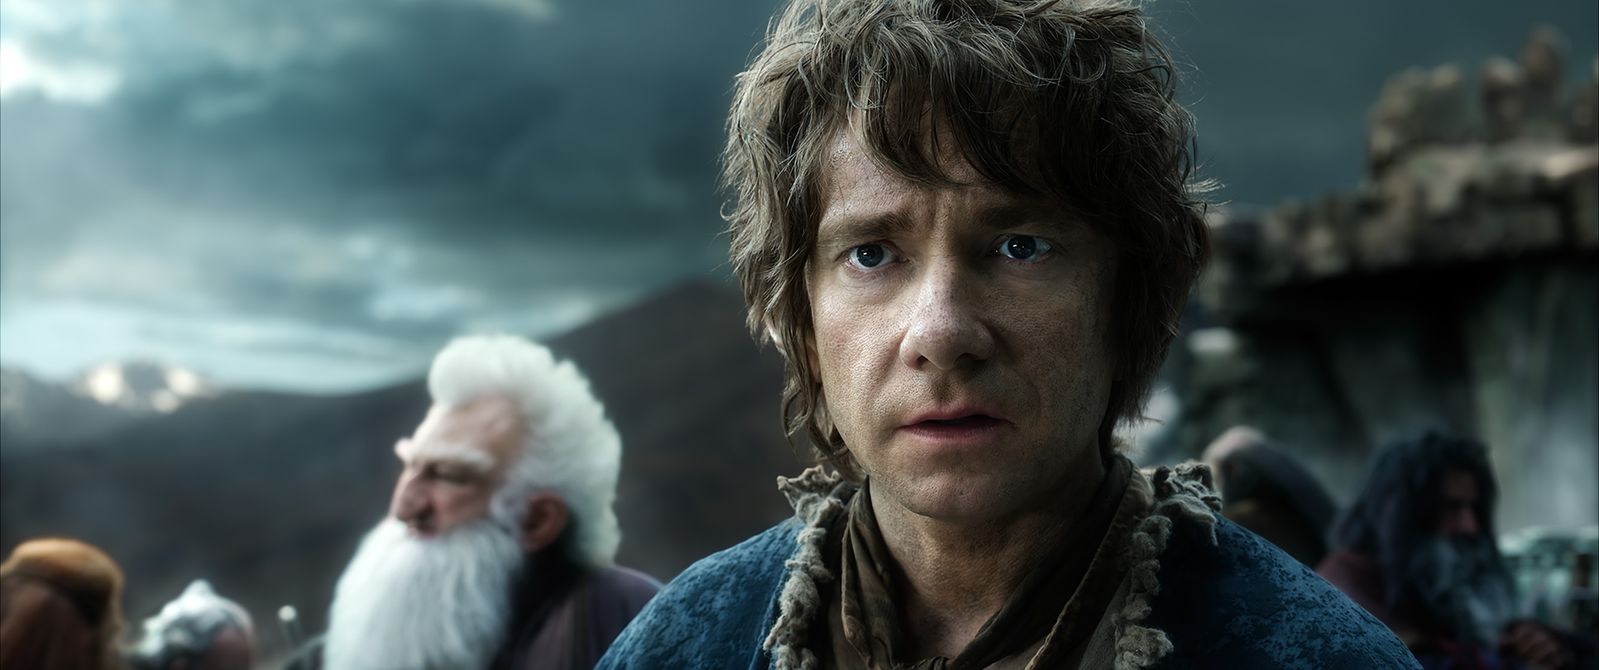 Here's what every Fellowship of the Ring member looks like in